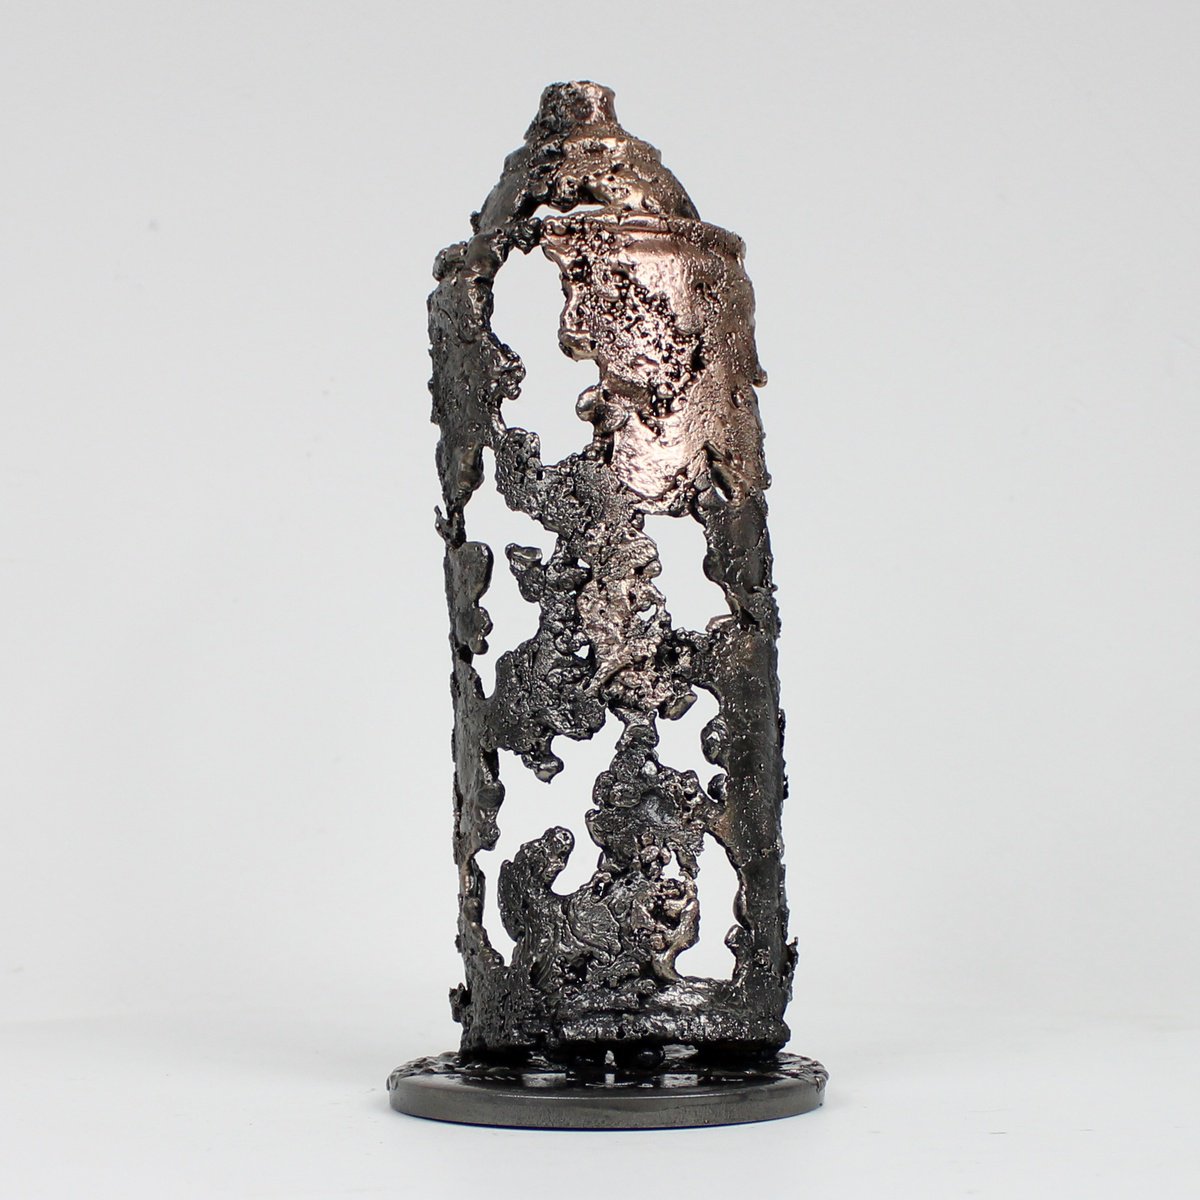 Spray can 15-22 - Bomb spray metal sculpture steel and bronze by Philippe Buil